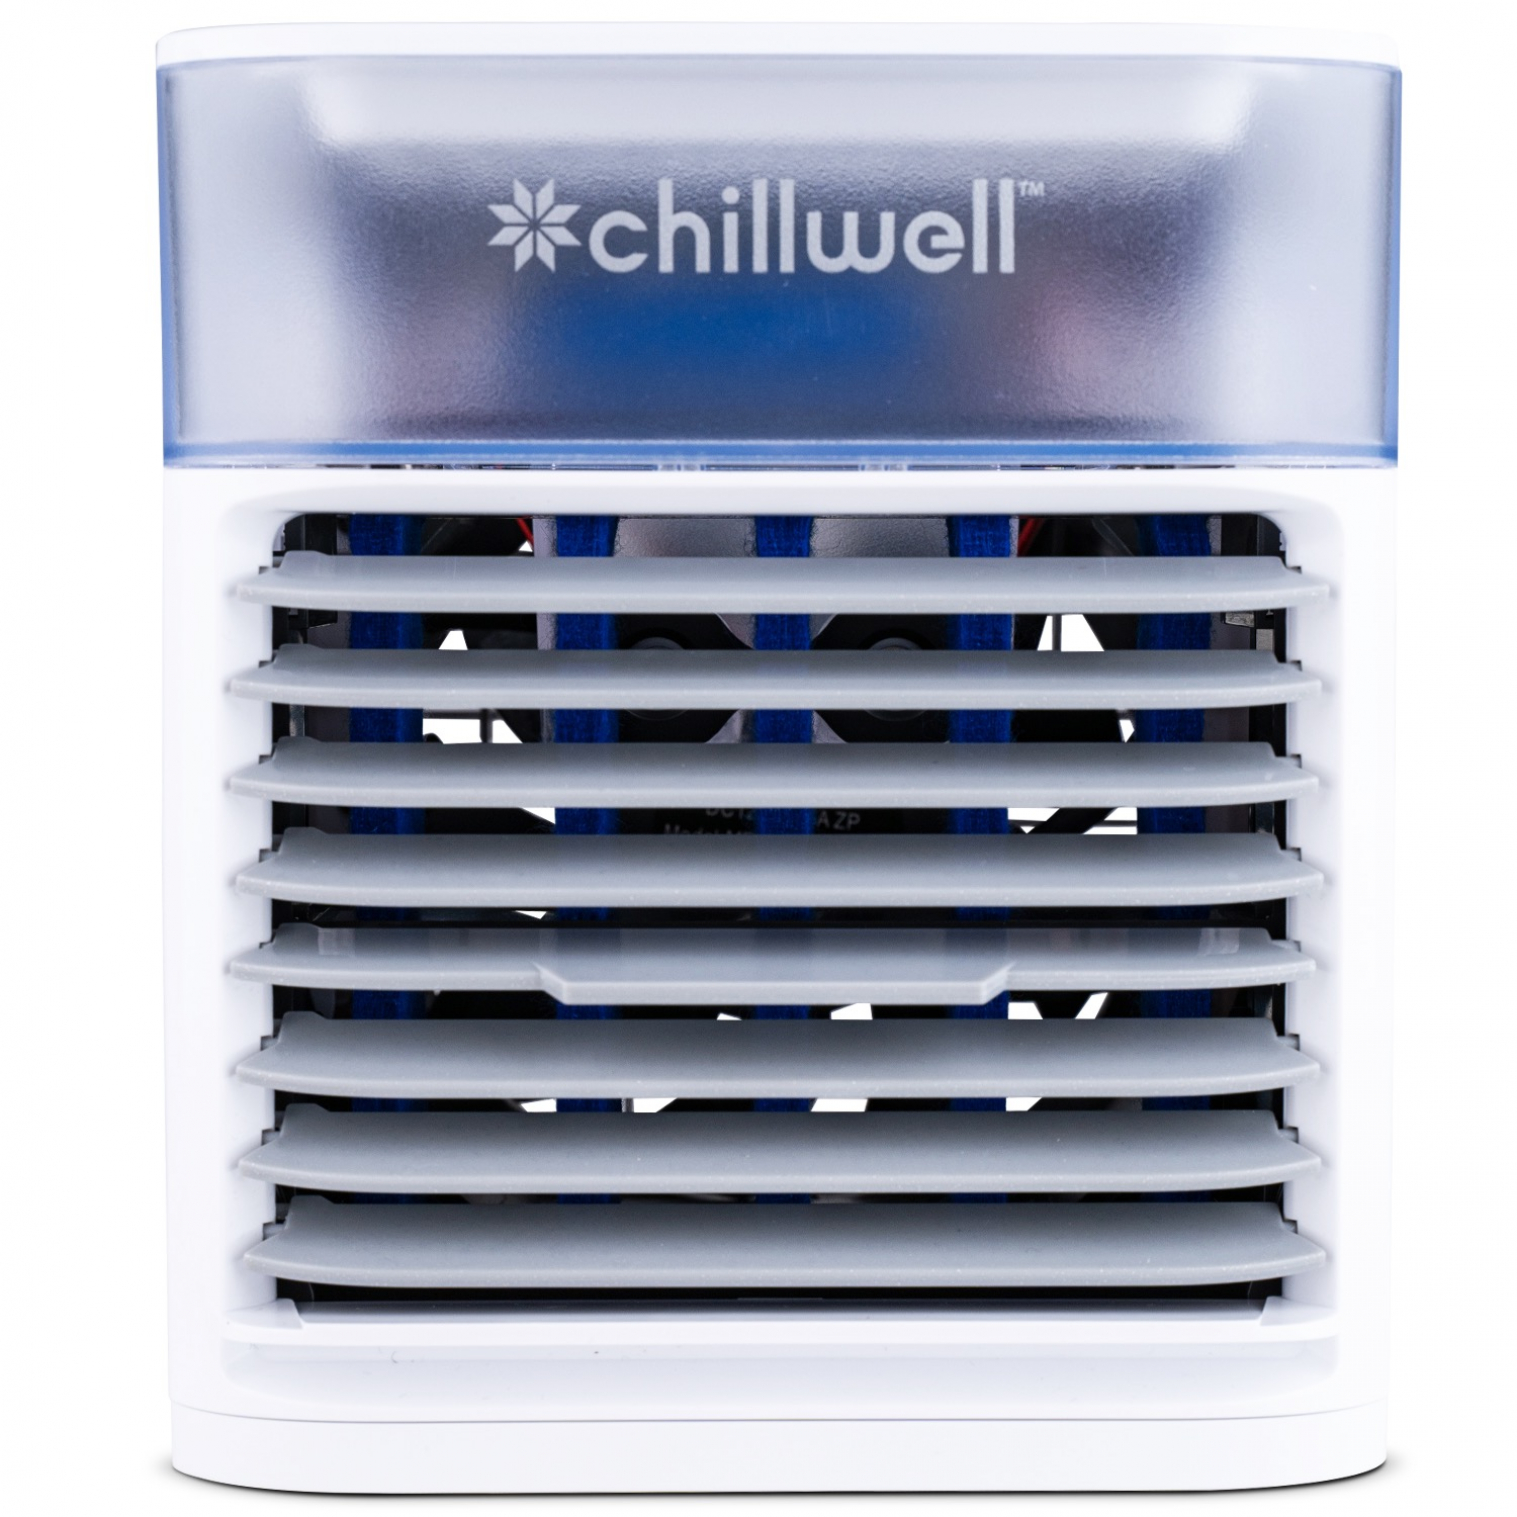 Chillwell AC Cooler Youtube